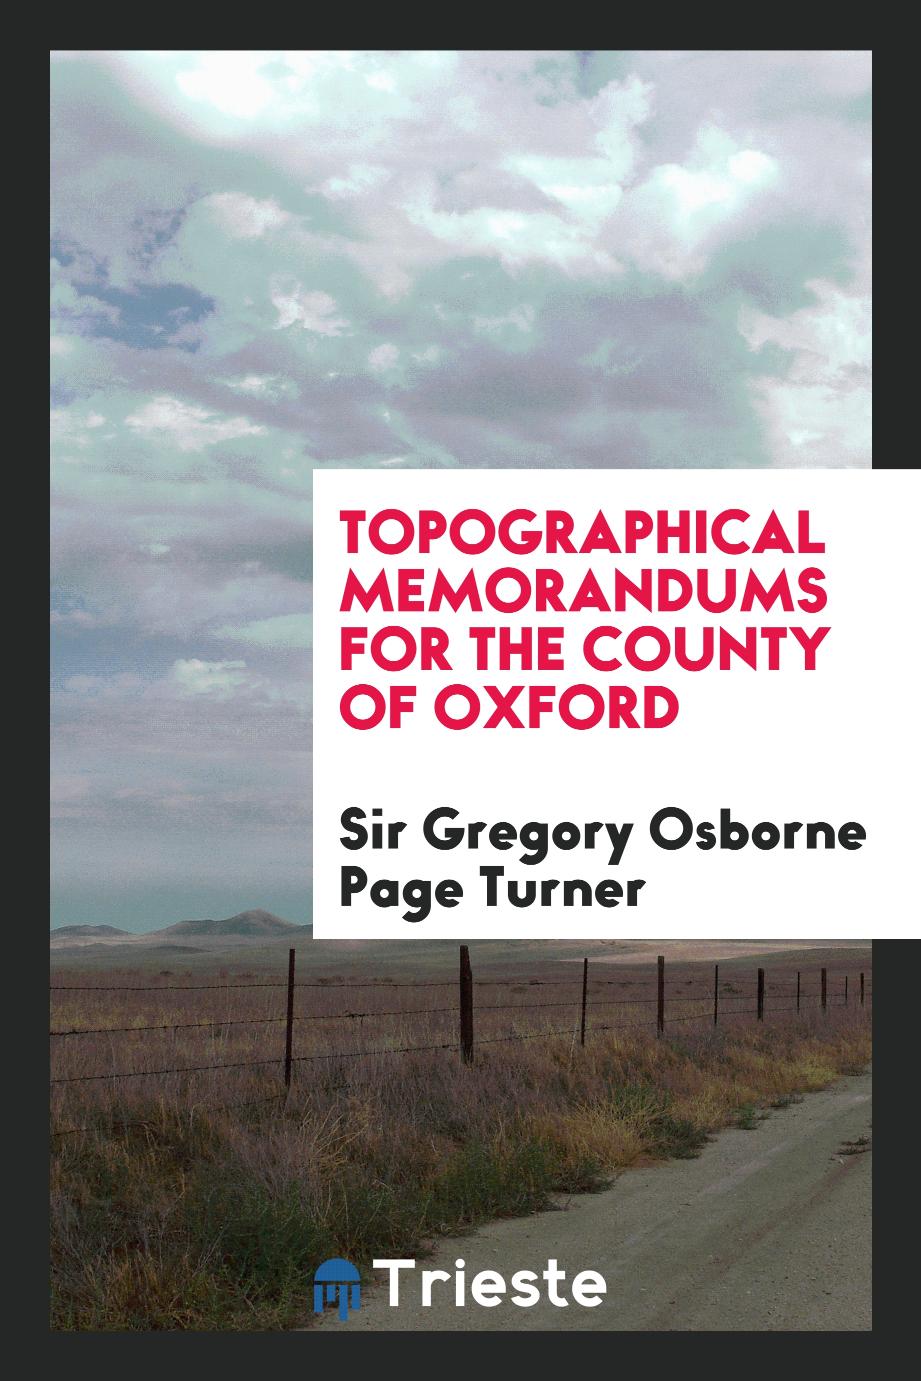 Topographical memorandums for the county of Oxford